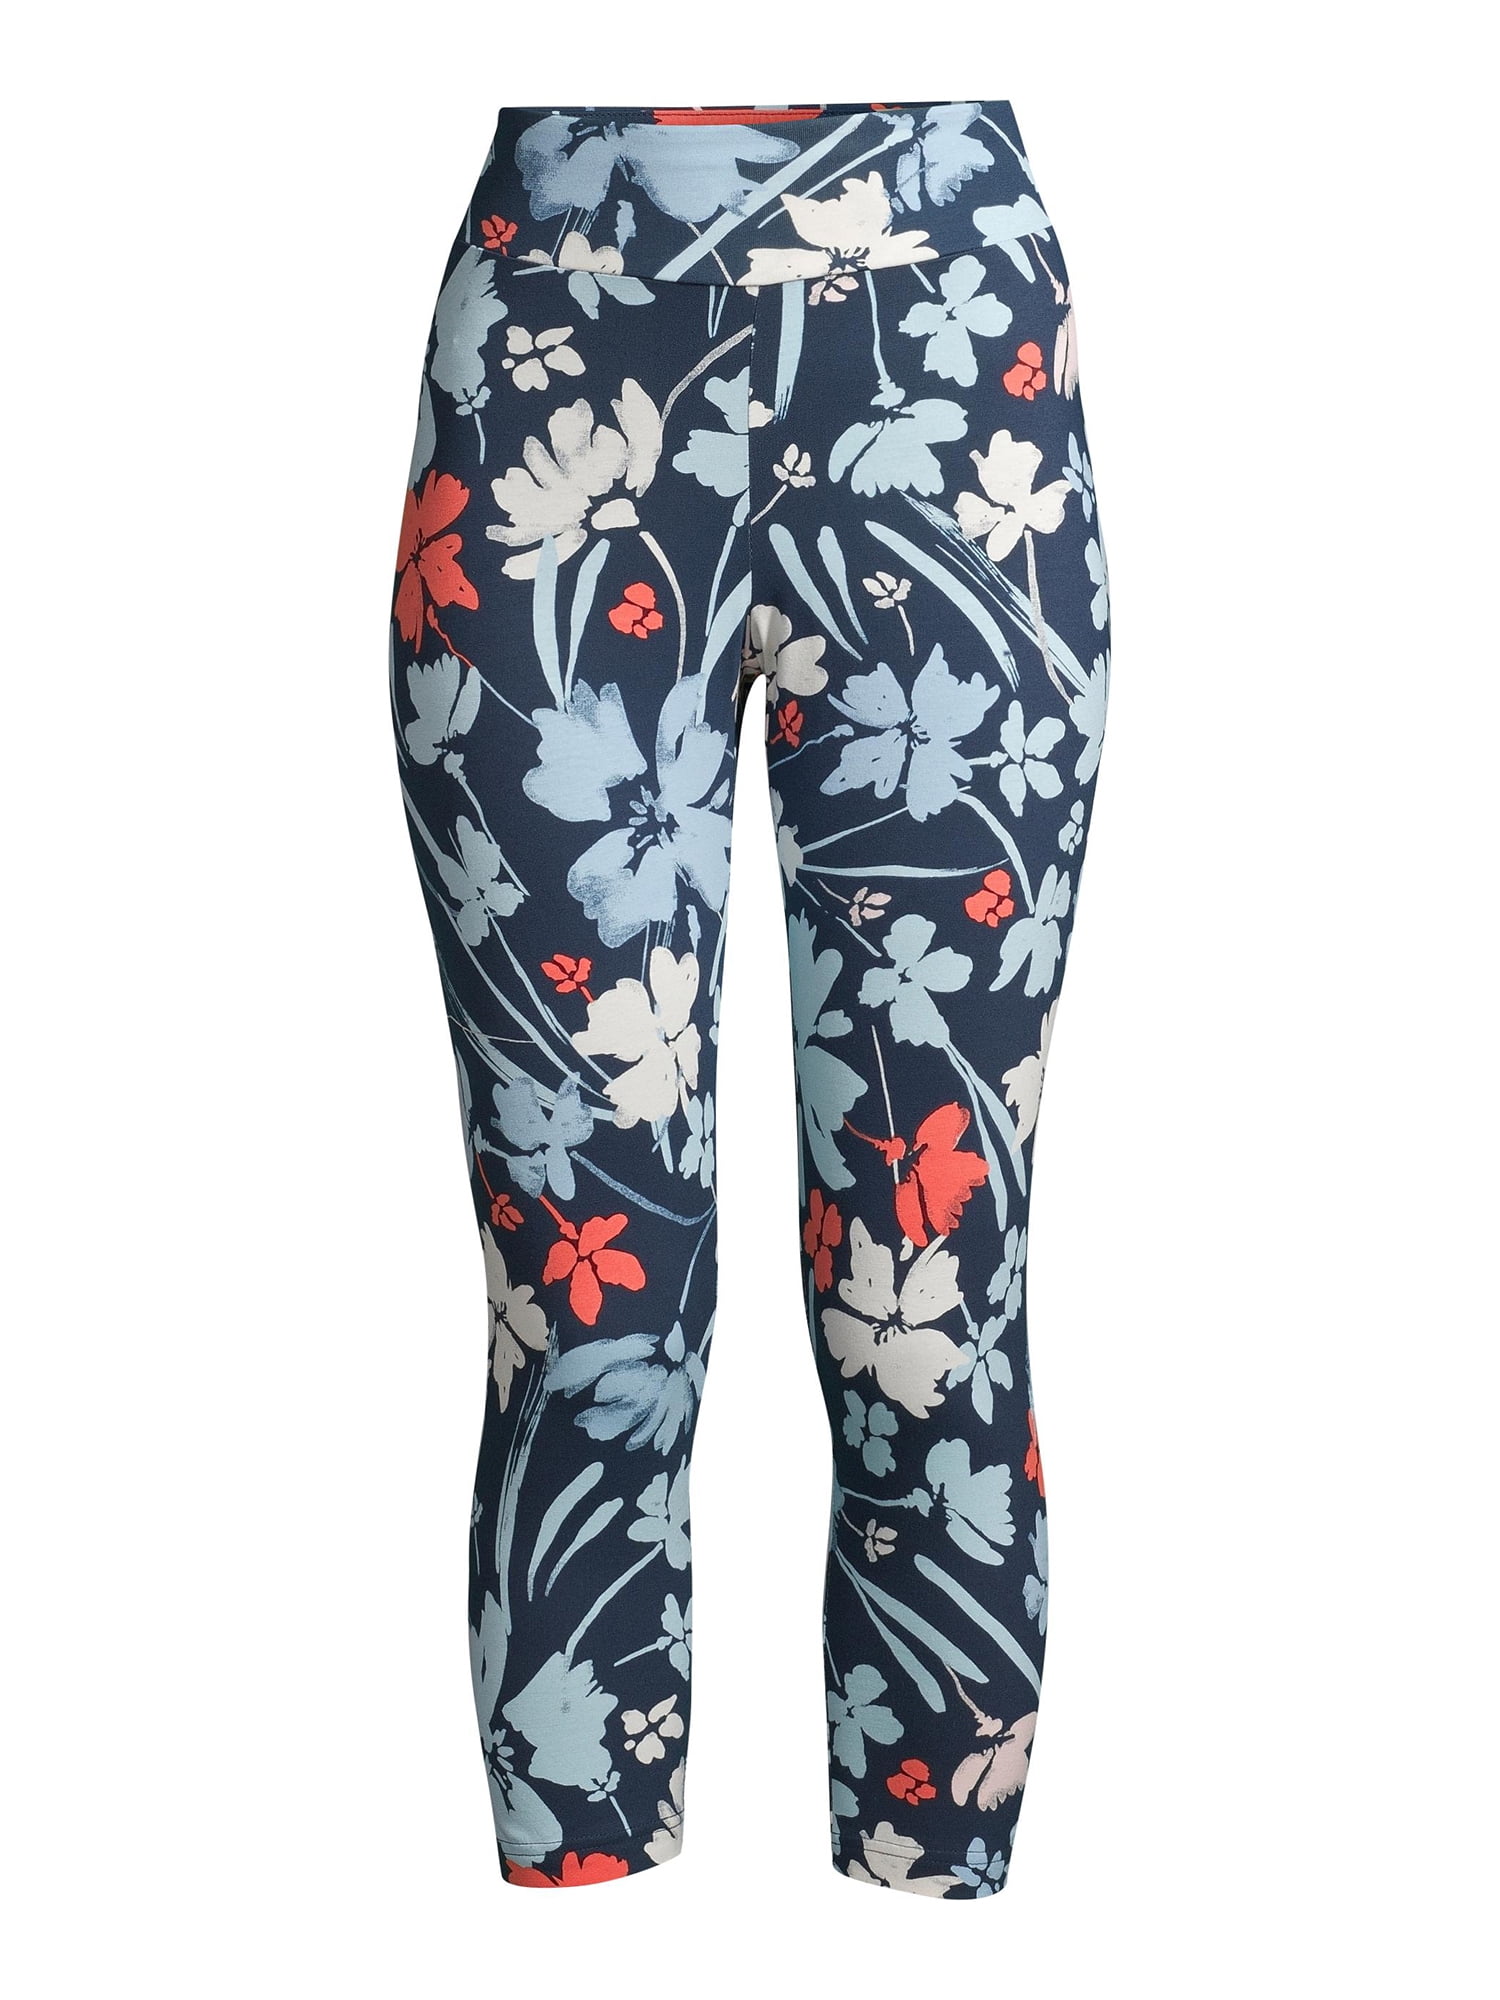 Time & Tru Large Floral Leggings Multi - $12 - From SmallTown